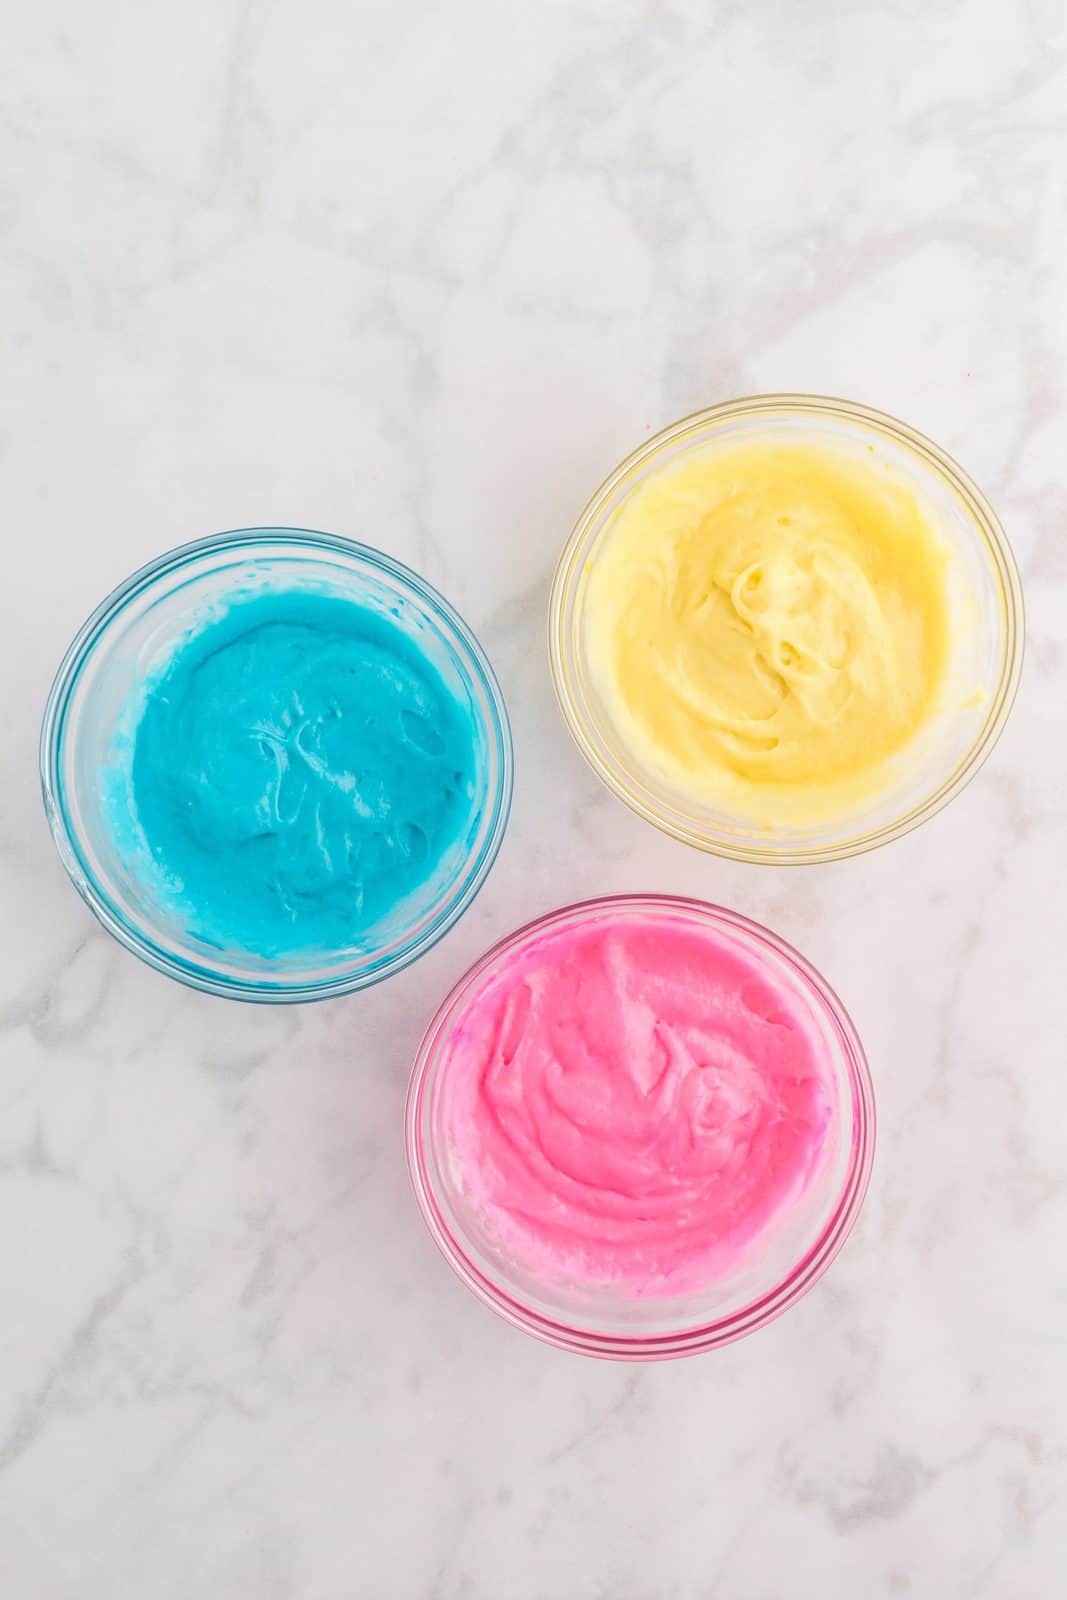 Remaining cake mix separated out into 3 bowls and colored blue, yellow and pink.